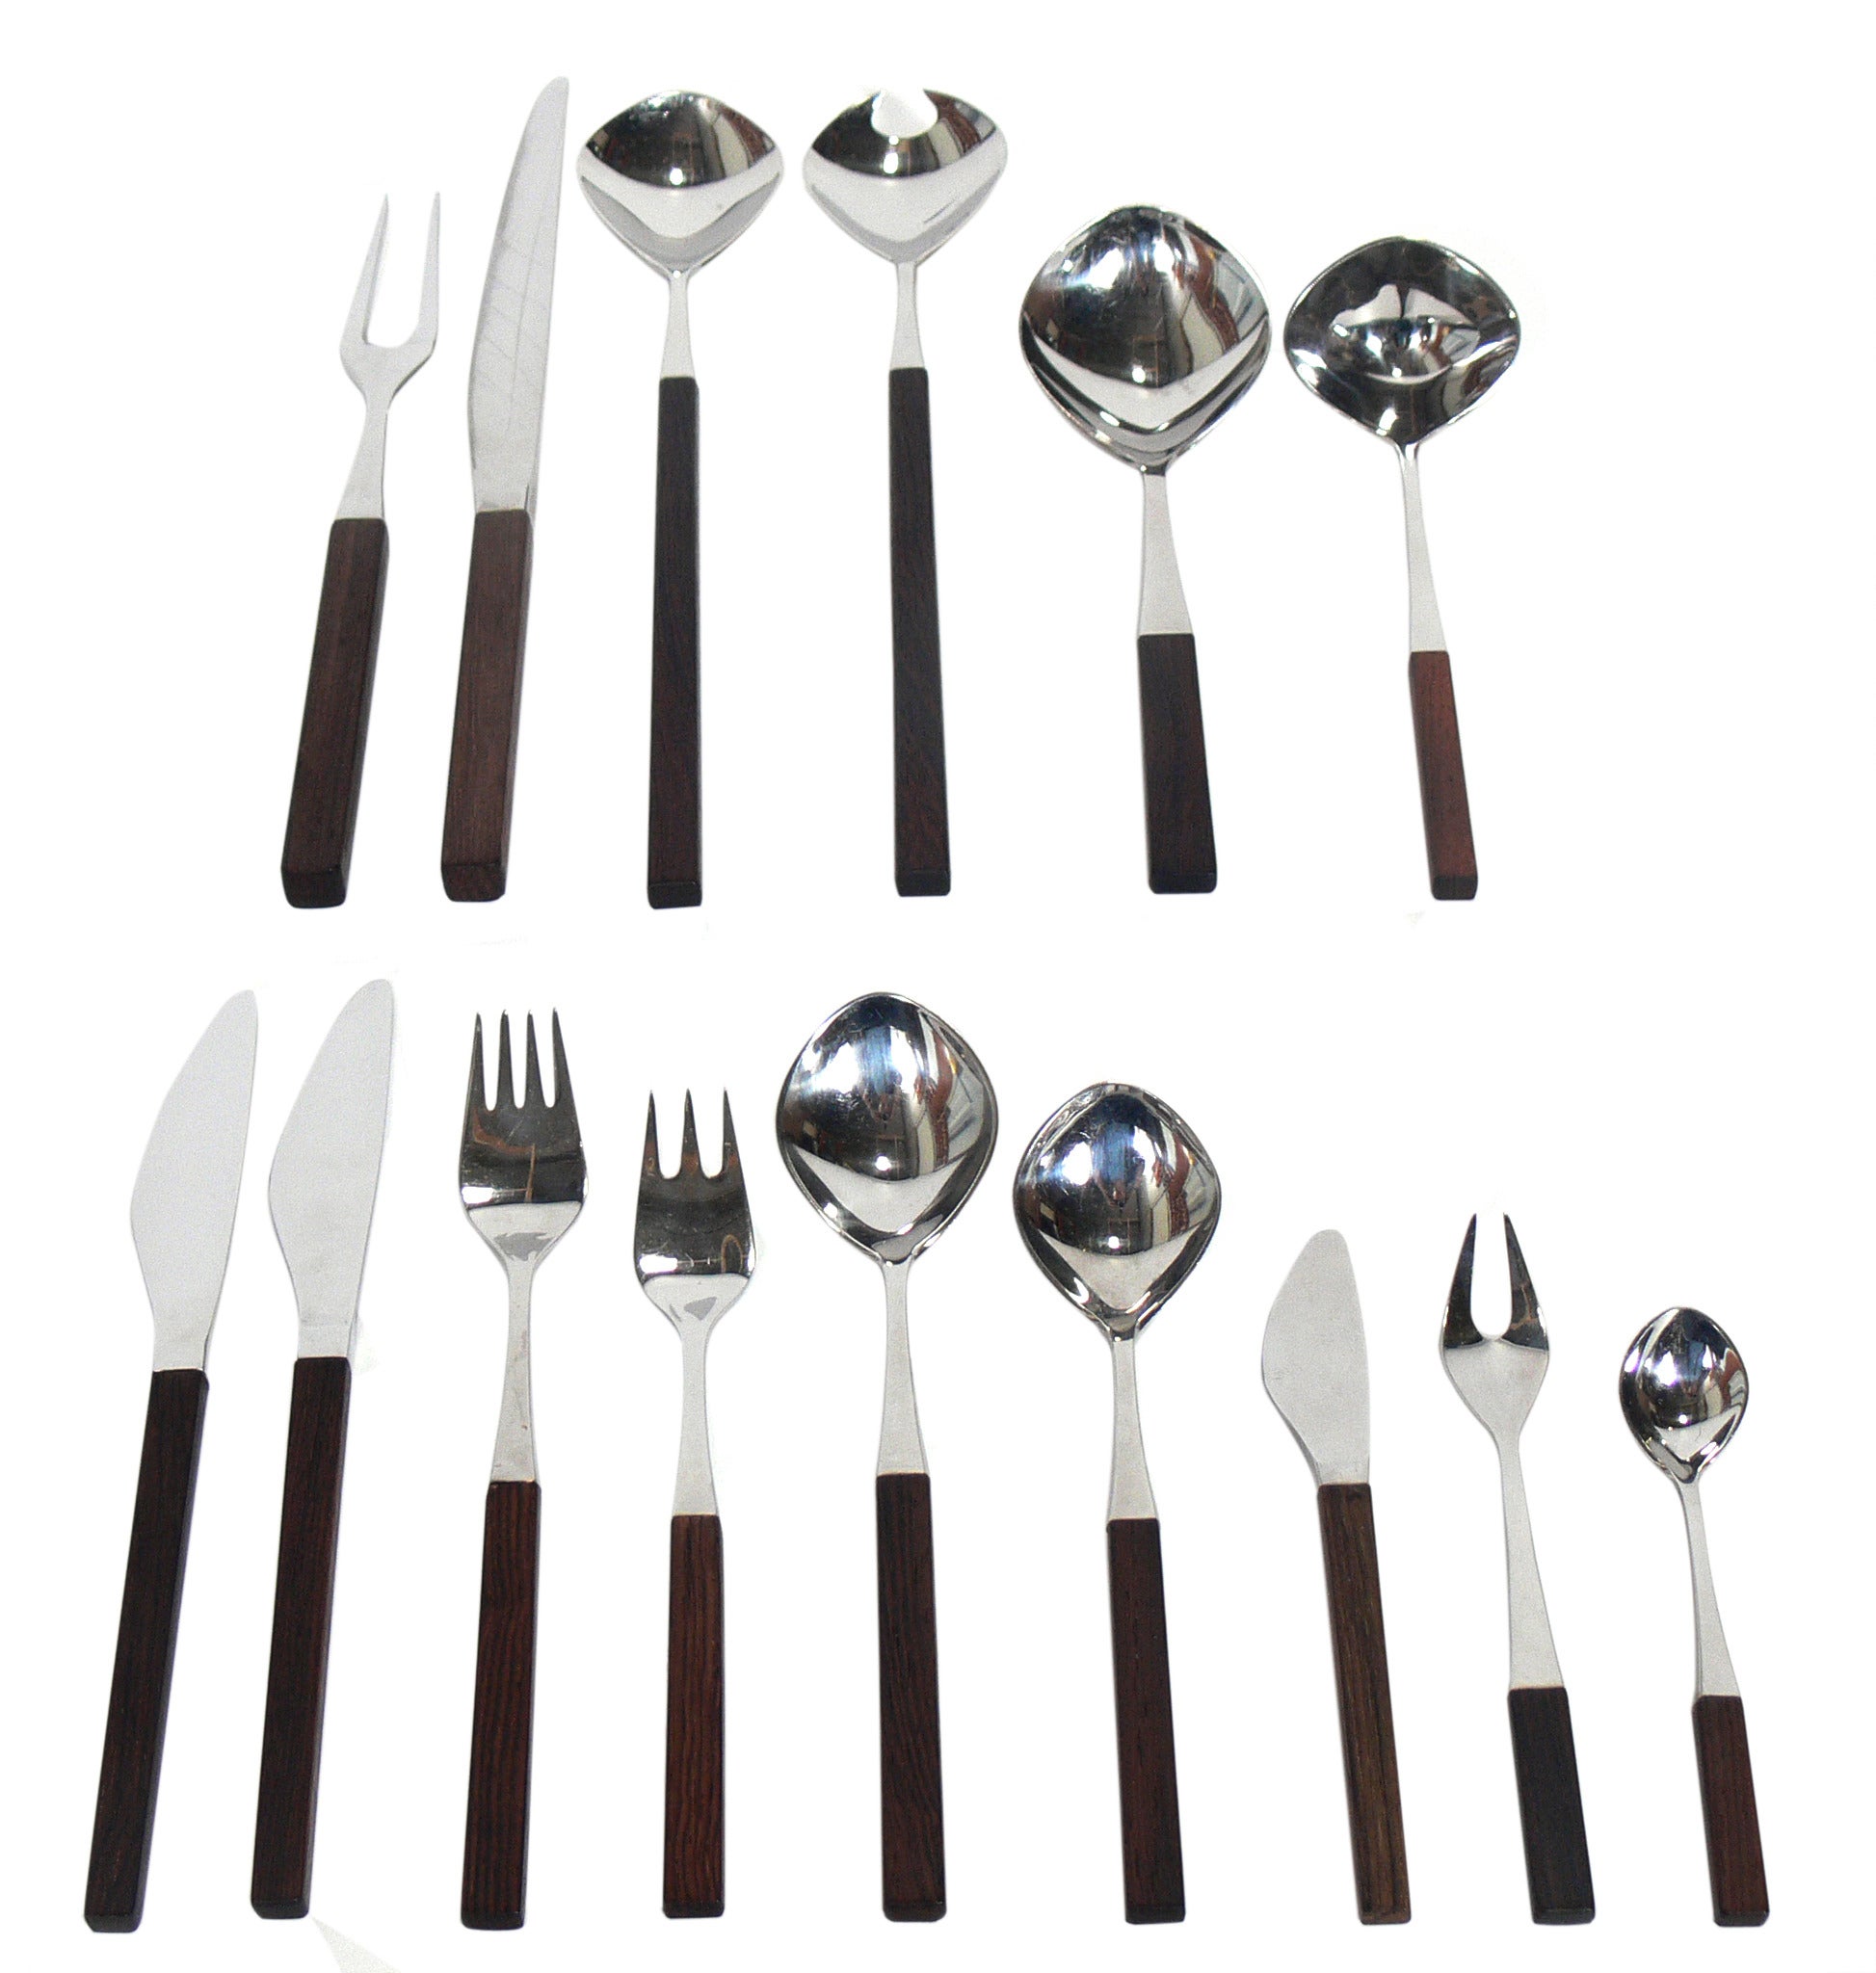 "Opus" Stainless Flatware Service for 12 Designed by Tias Eckhoff for Lundtofte